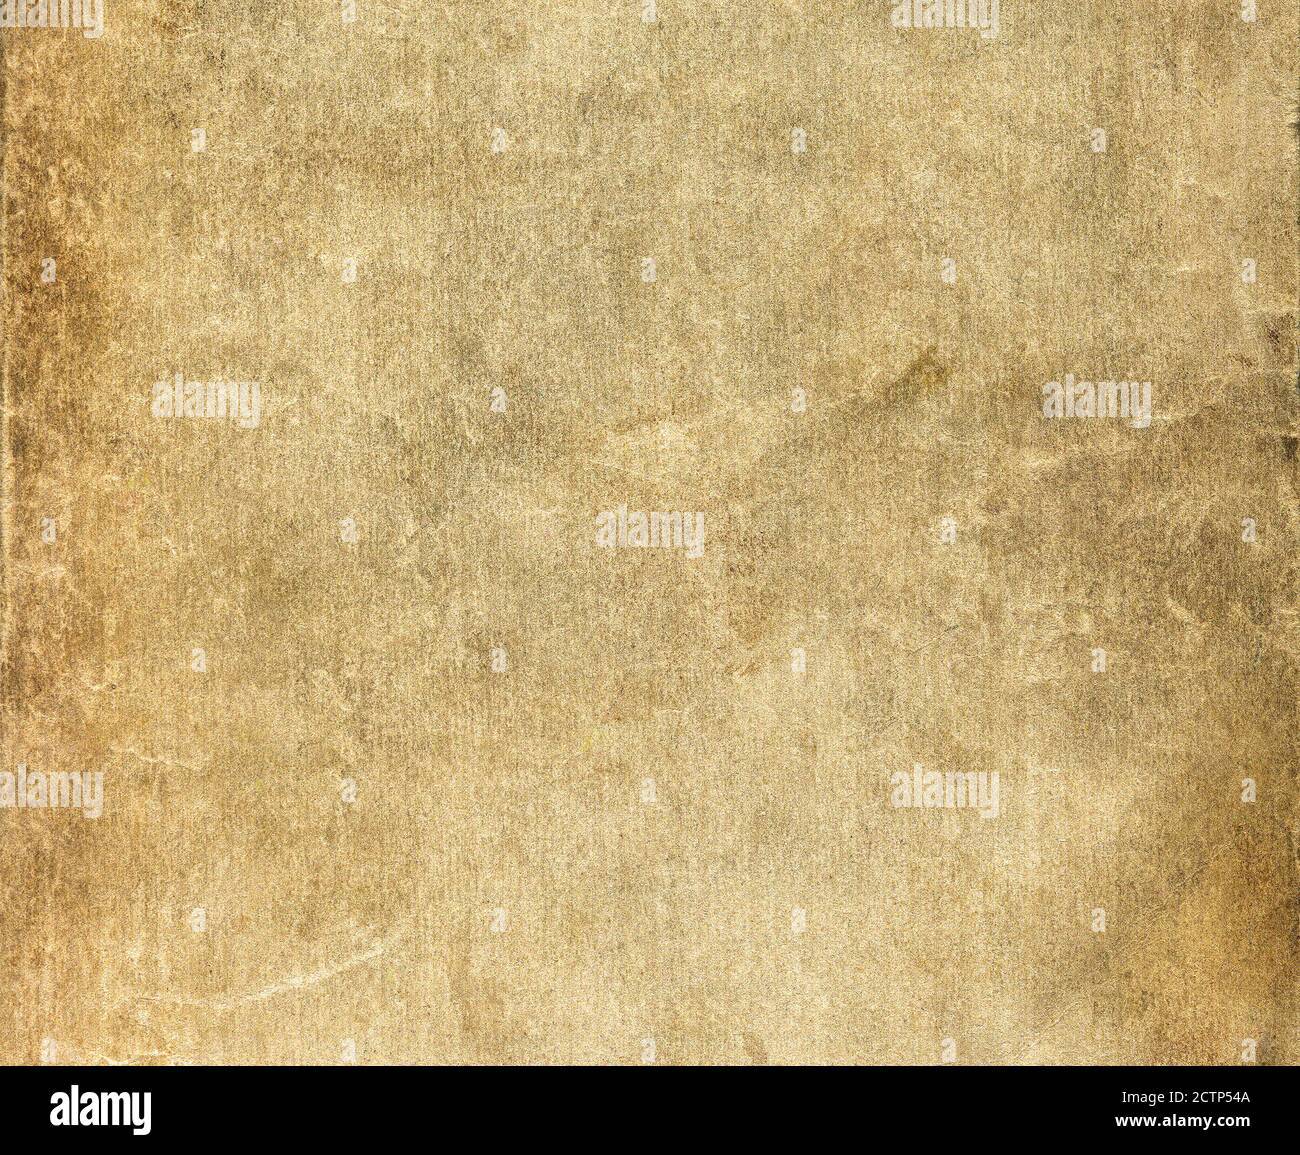 Old paper texture, vintage paper background, antique paper Stock Photo -  Alamy